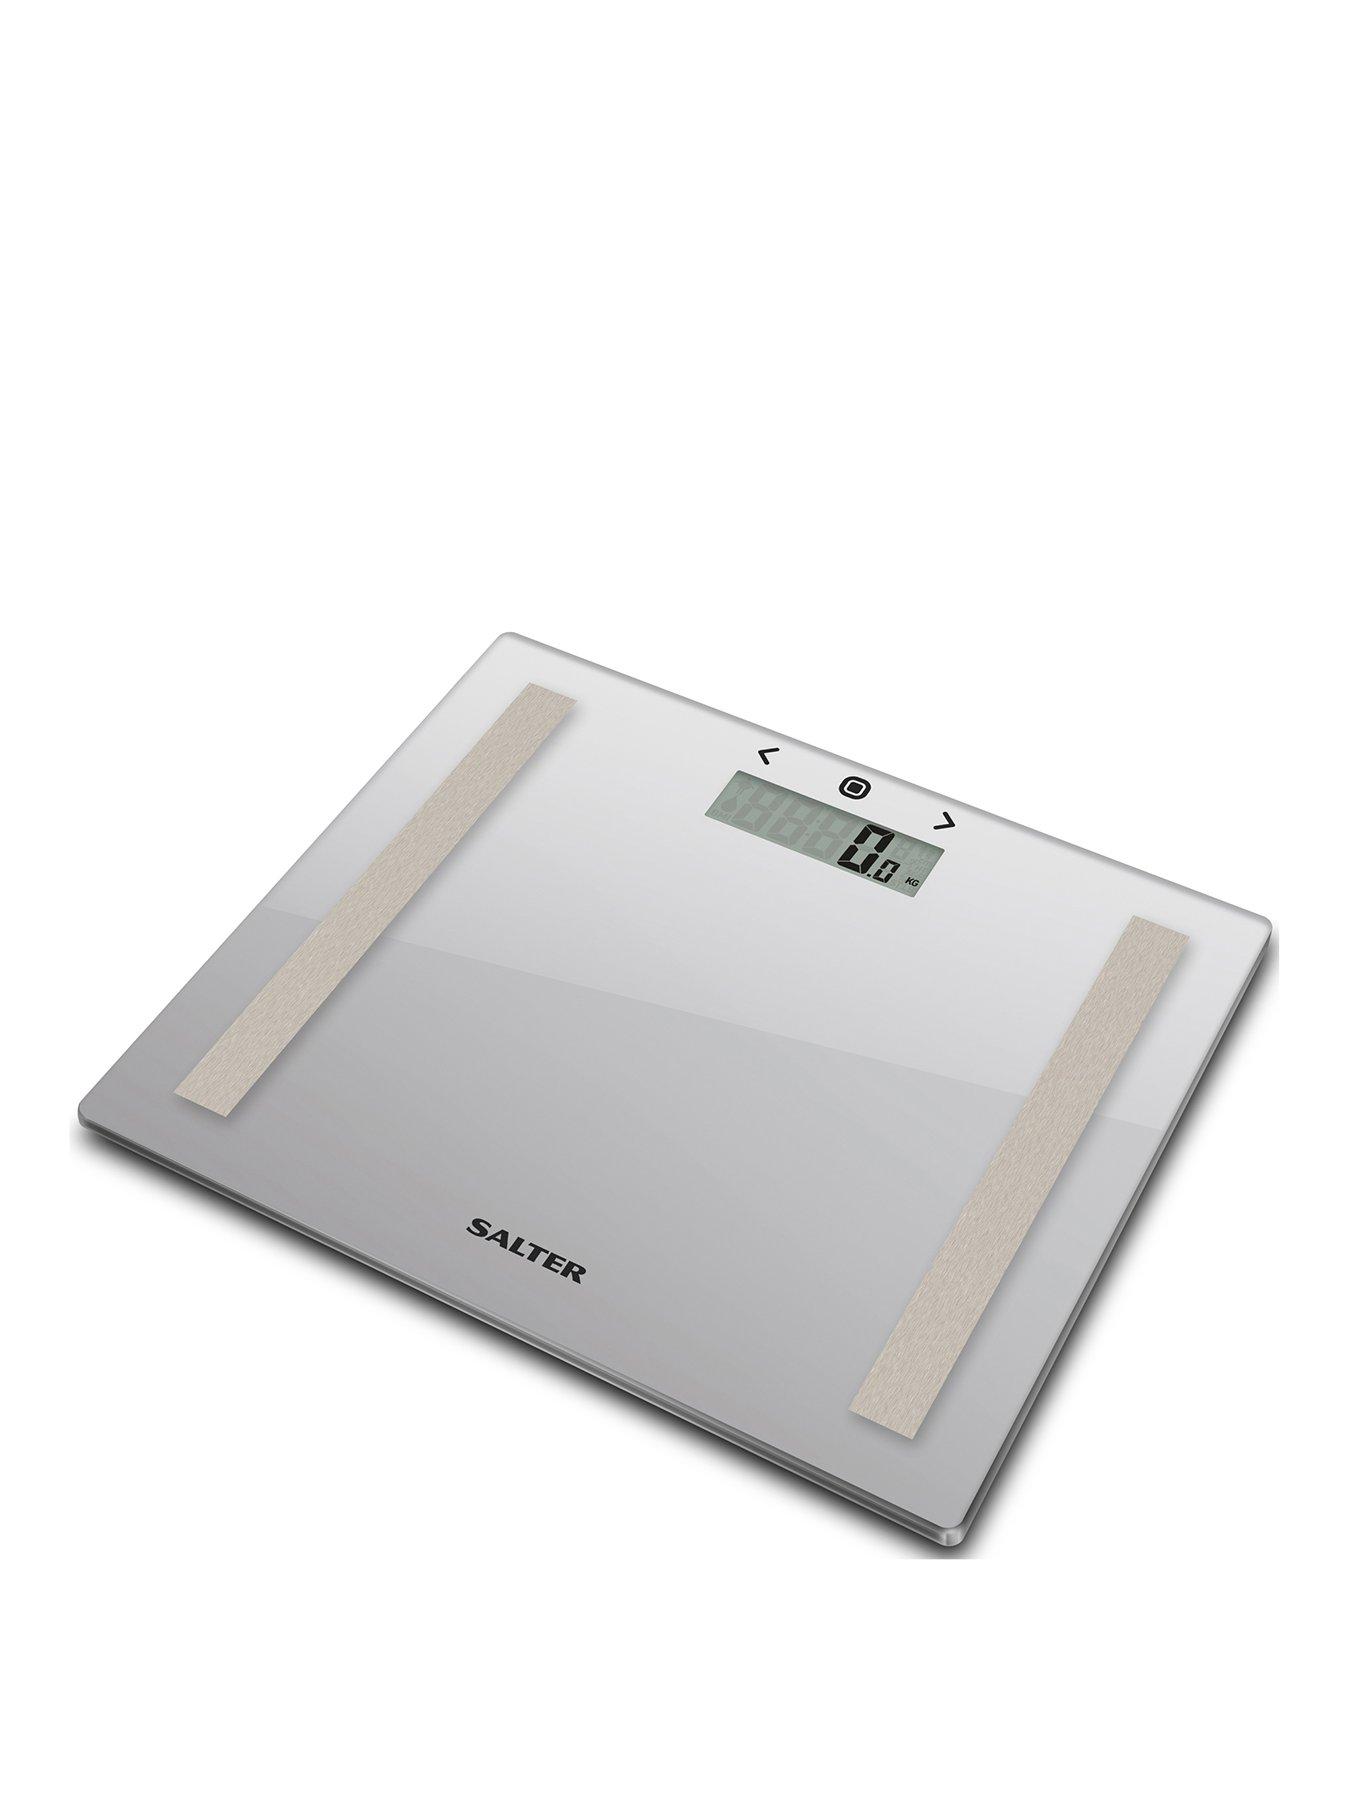 Mechanical Bathroom Scale,High Precision Anti-Skid Body Weight Scales,Easy  to Read Magnified Display,Large Capacity 150 Kg Digital Scale